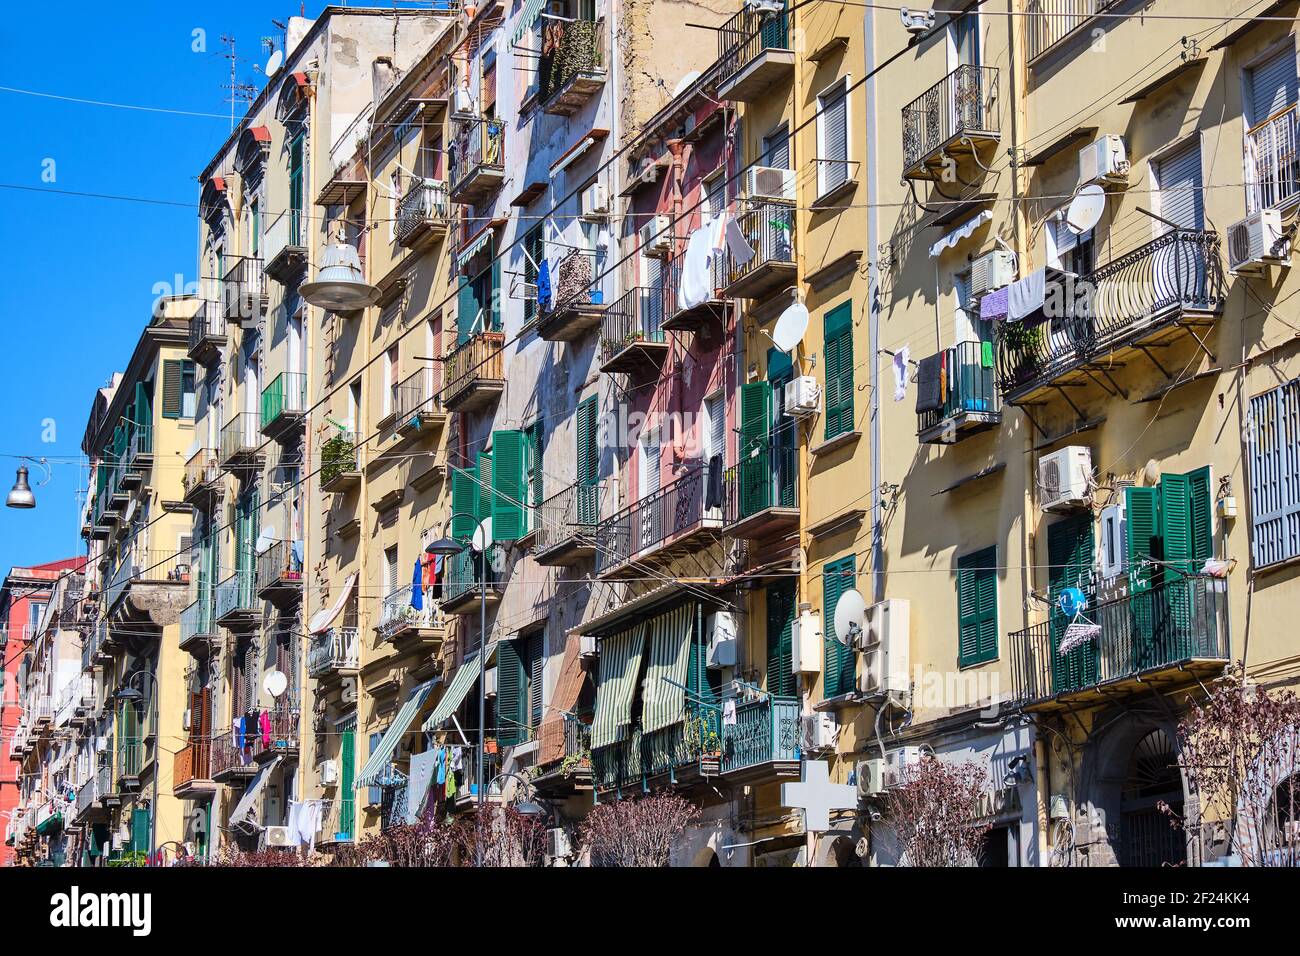 Housing in the old town of Naples in Italy Stock Photo